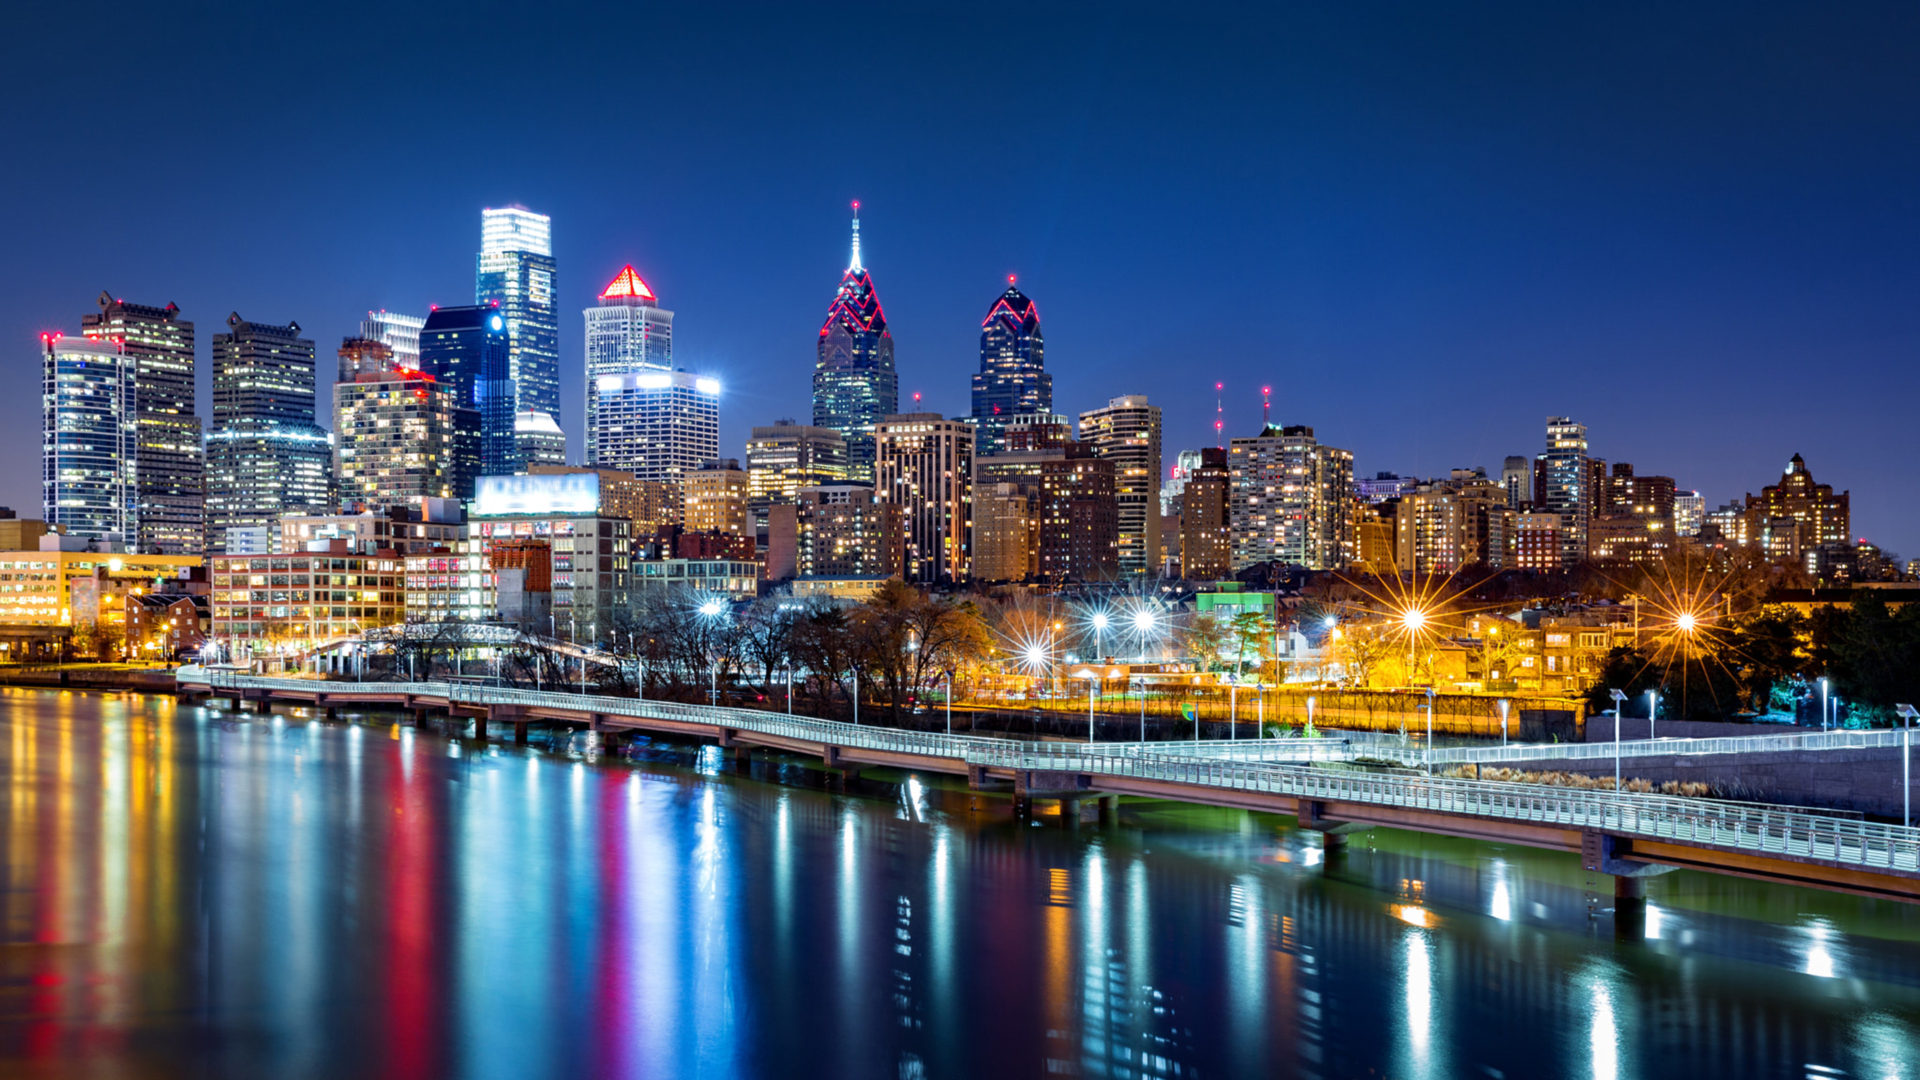 Philadelphia cityscape night reflected in schuylkill river city in pennsylvania united states desktop hd wallpaper for pc tablet and mobile